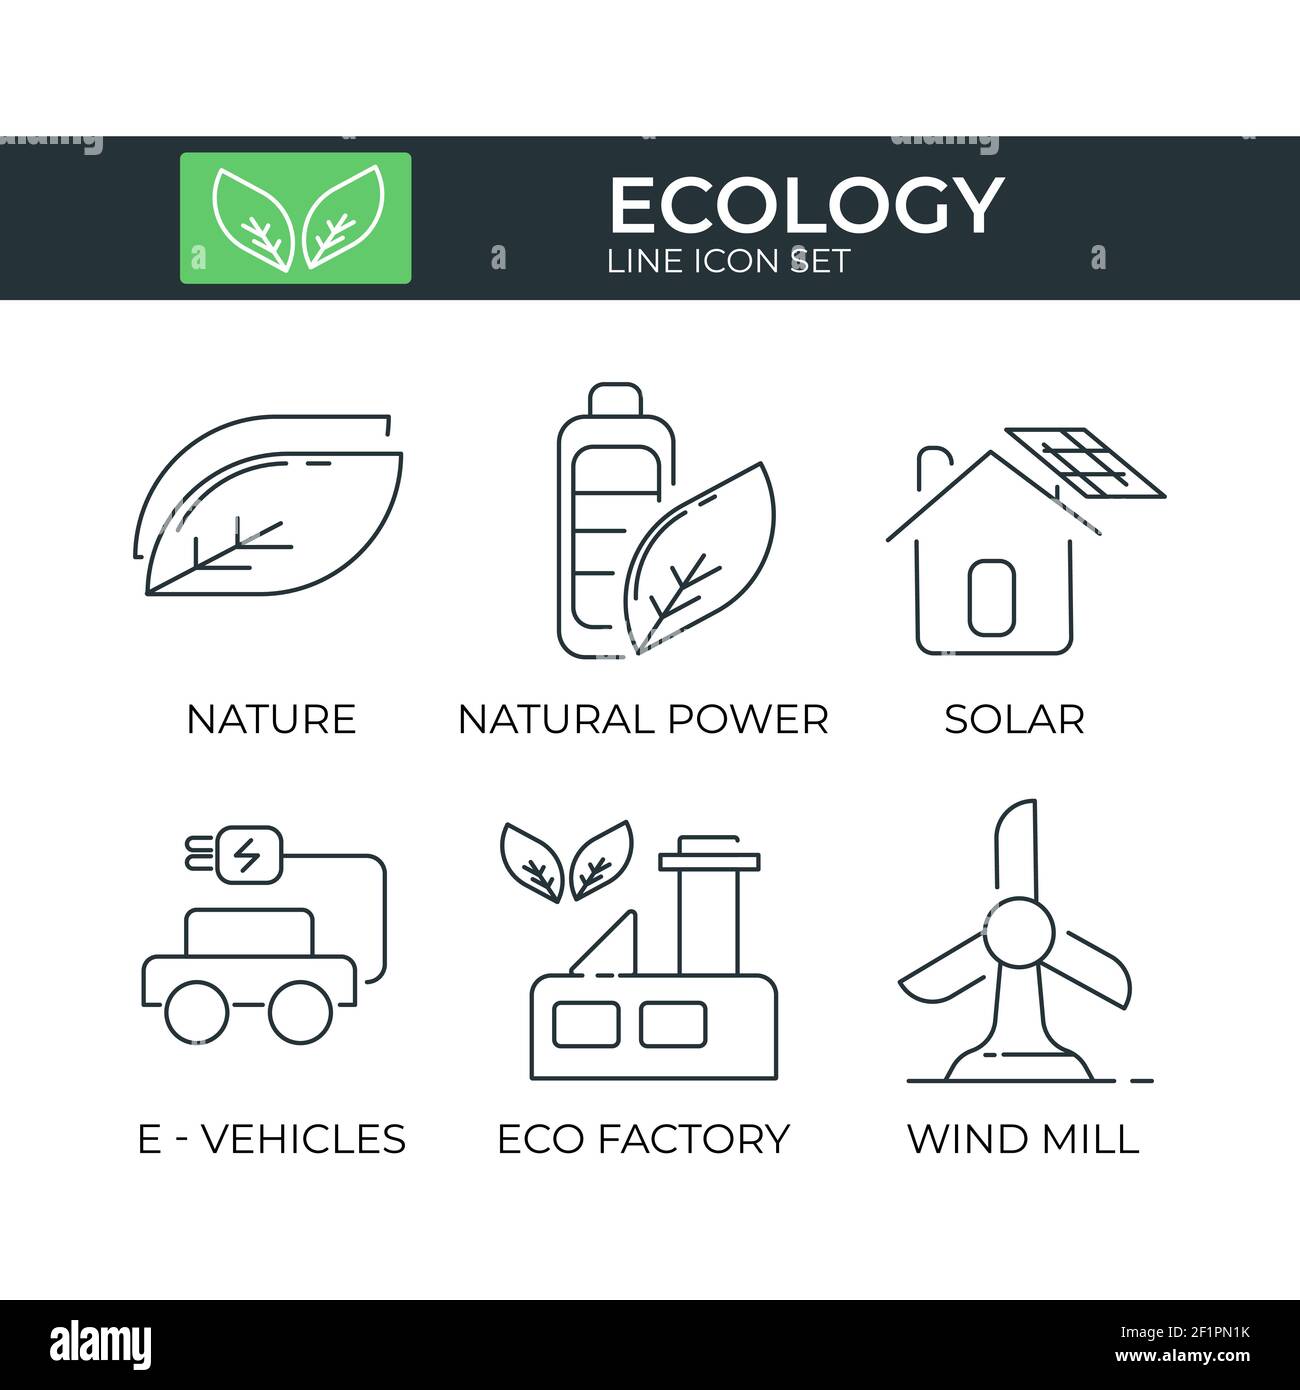 Ecology and Bio Icon Set of Leaf, Green Energy, Solar Panel, Electric Vehicle, Green Factory, Wind Mill Stock Vector